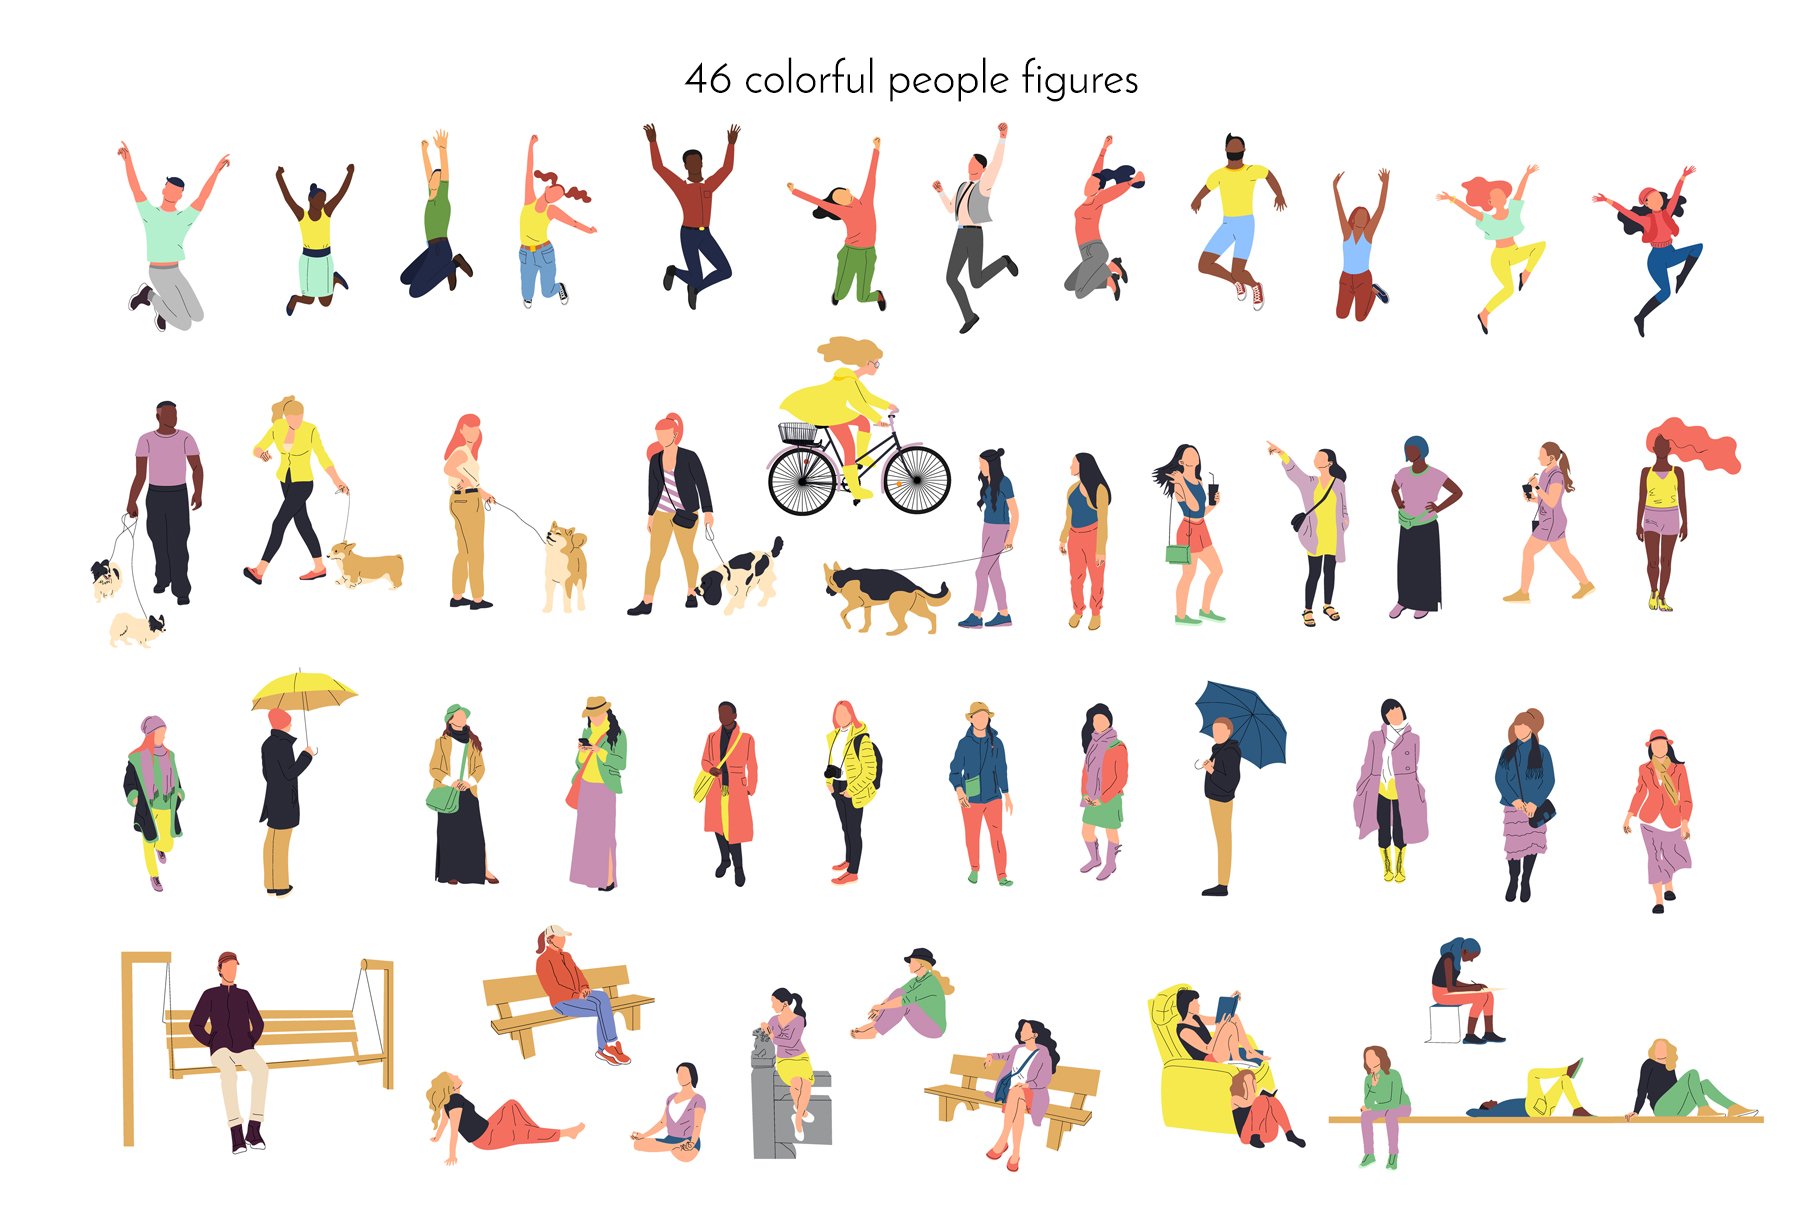 46 colorful people figures.